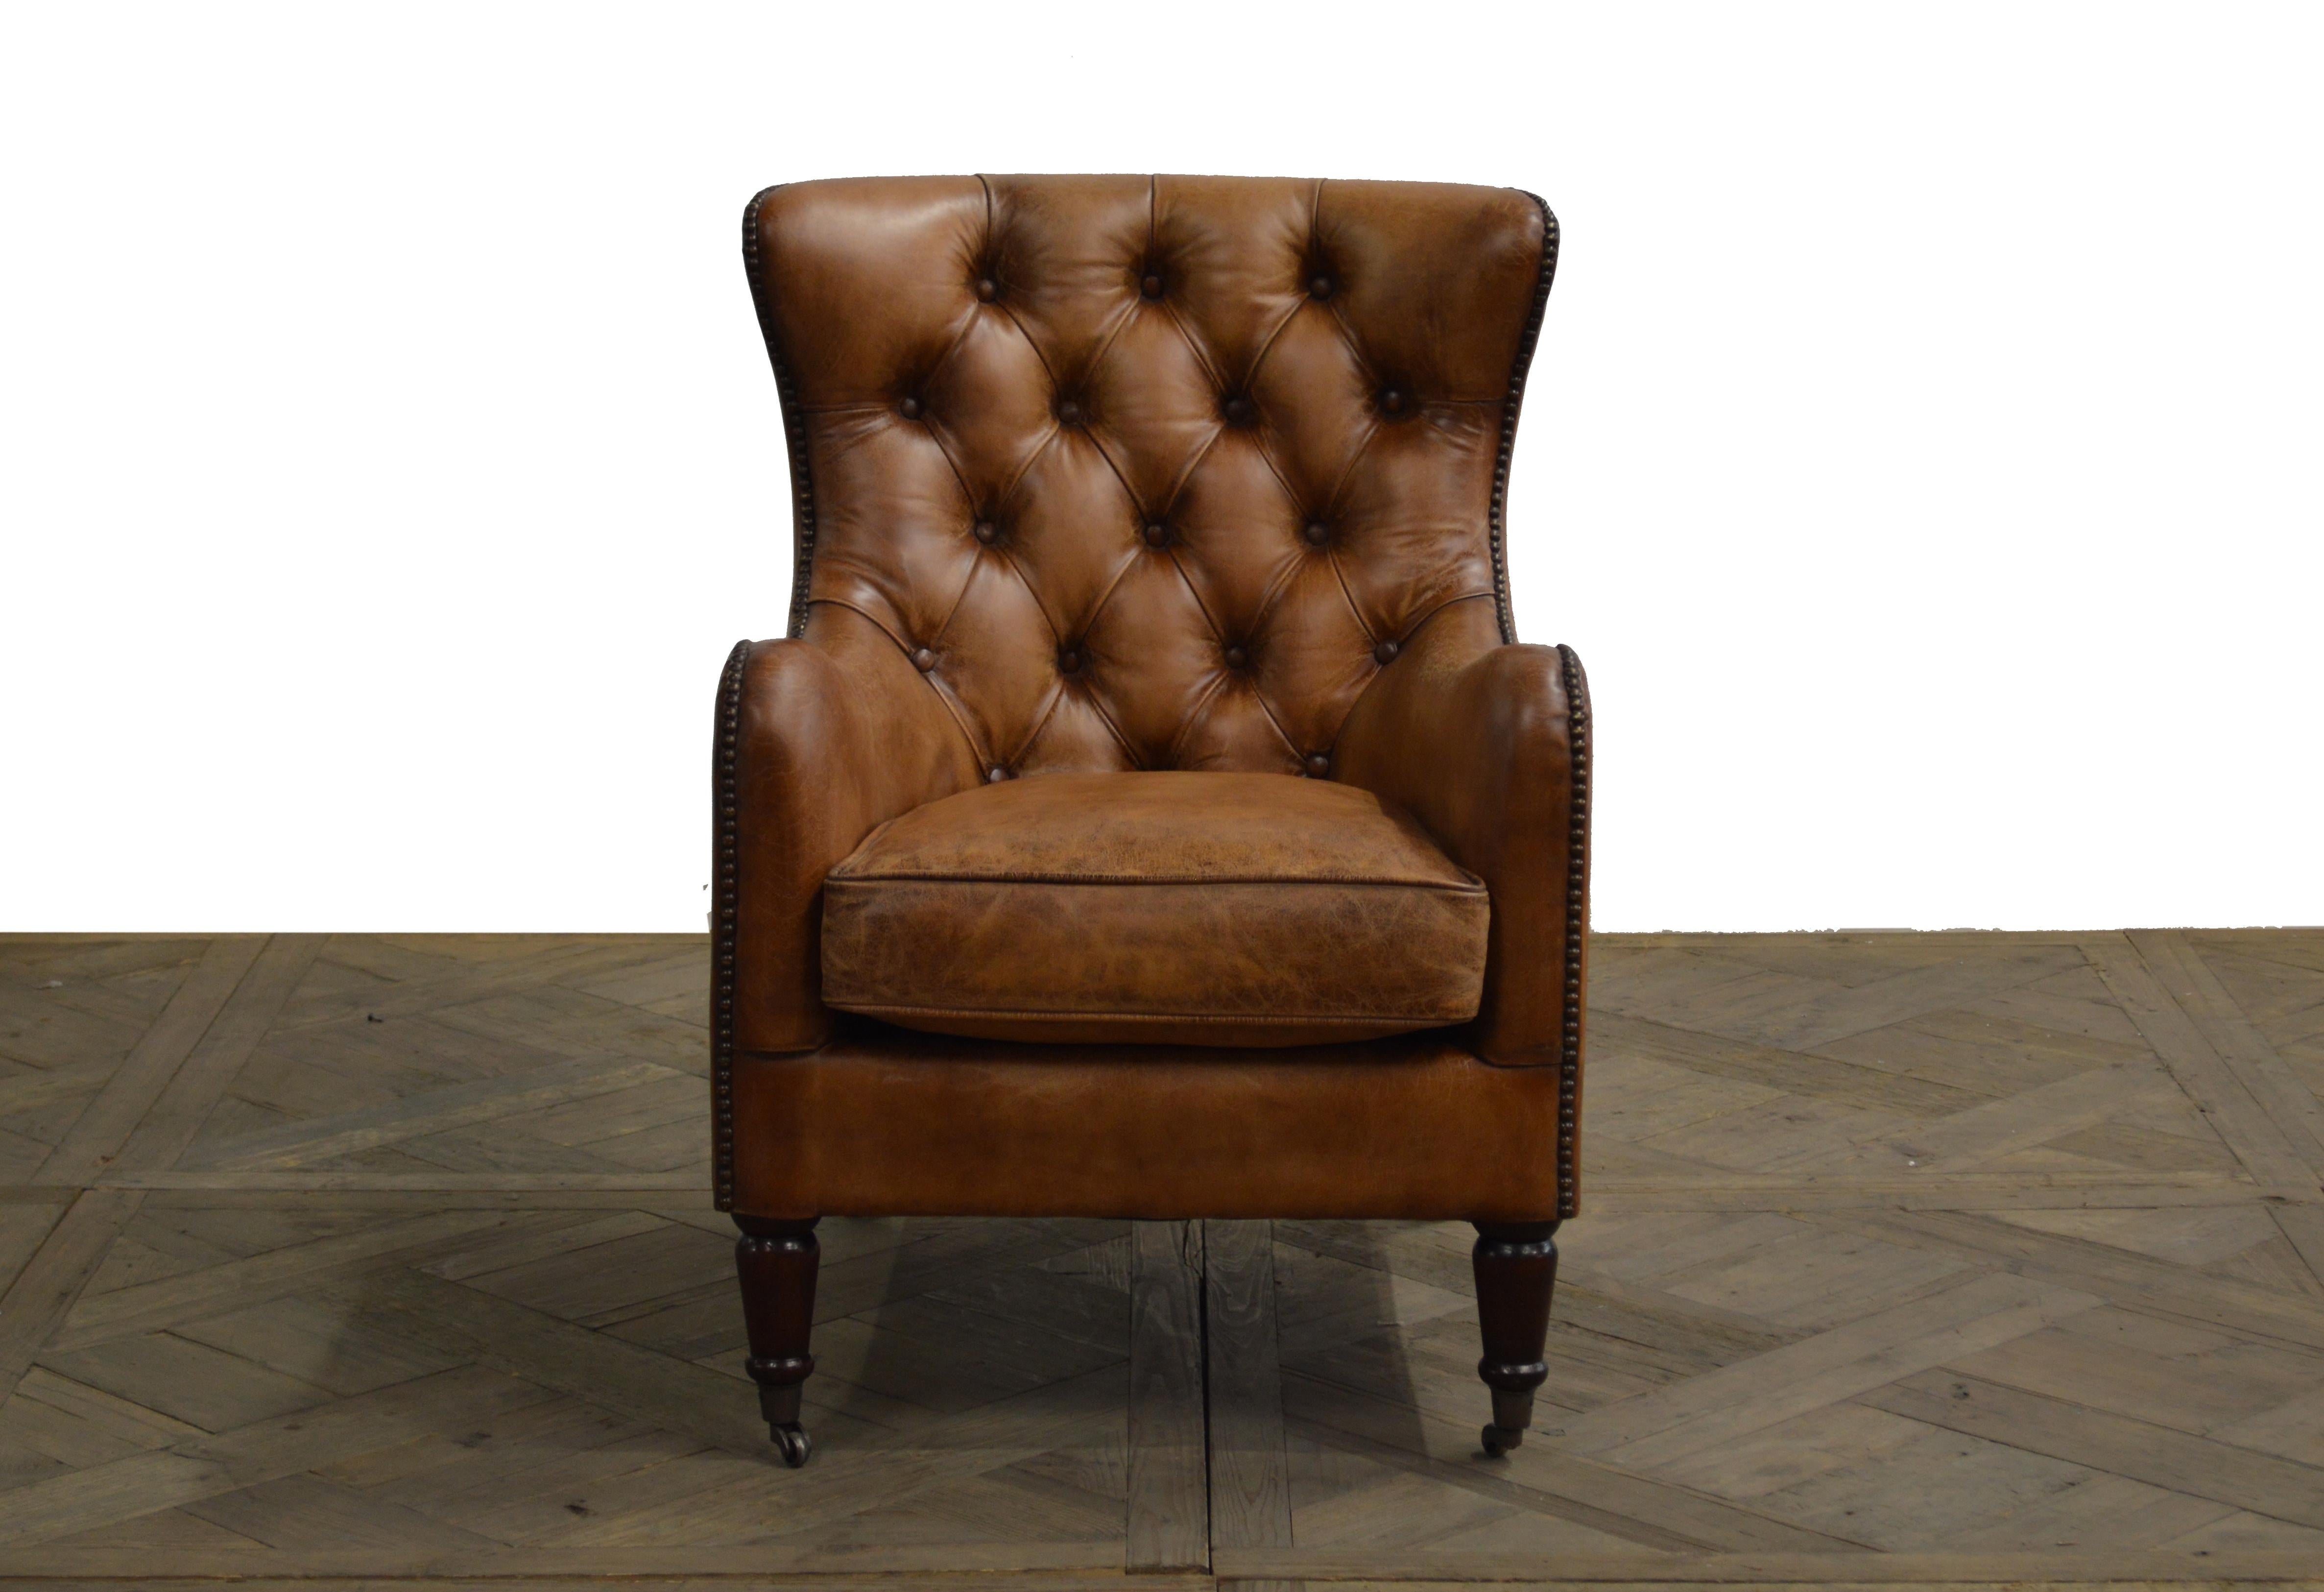 Handsome set of four Regency style leather library chairs with tufted backs. Priced per chair.